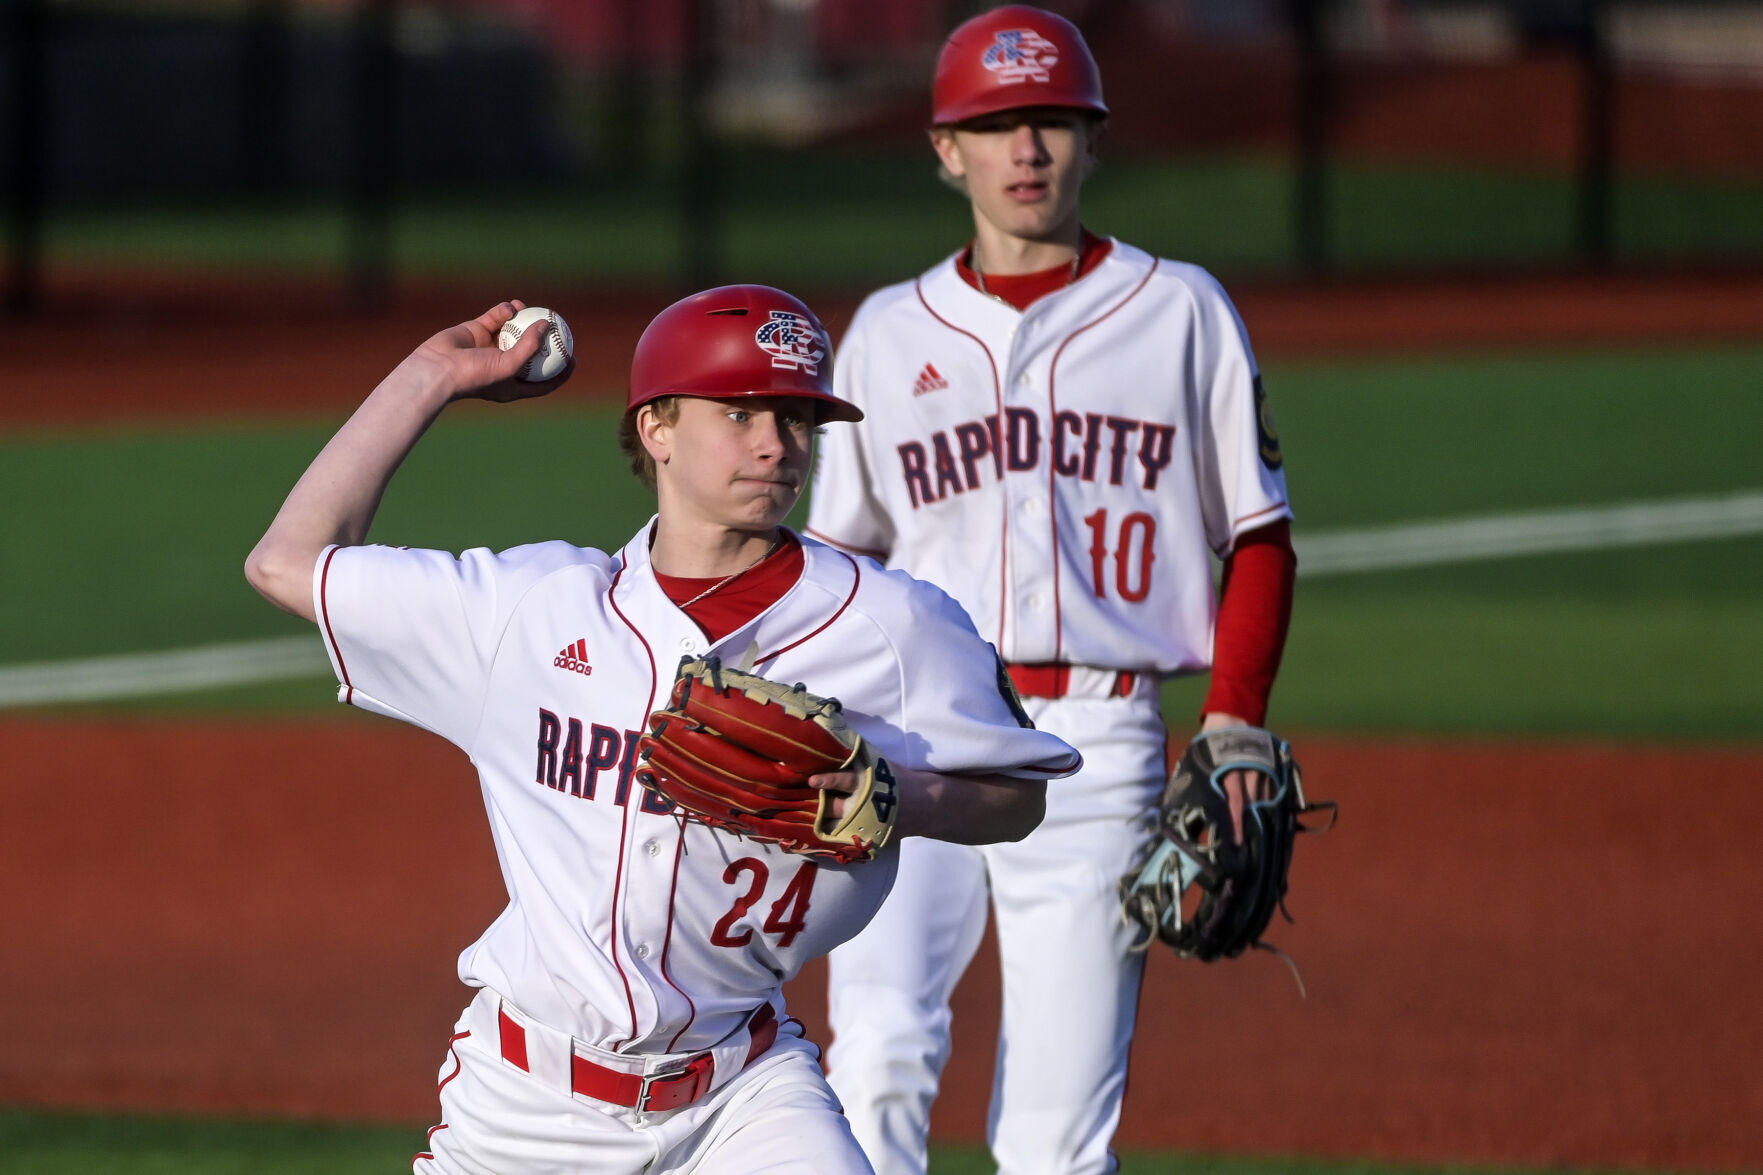 Rapid City Post 22 Sweeps Sheridan Post 7 in High-Scoring Opening Day Series